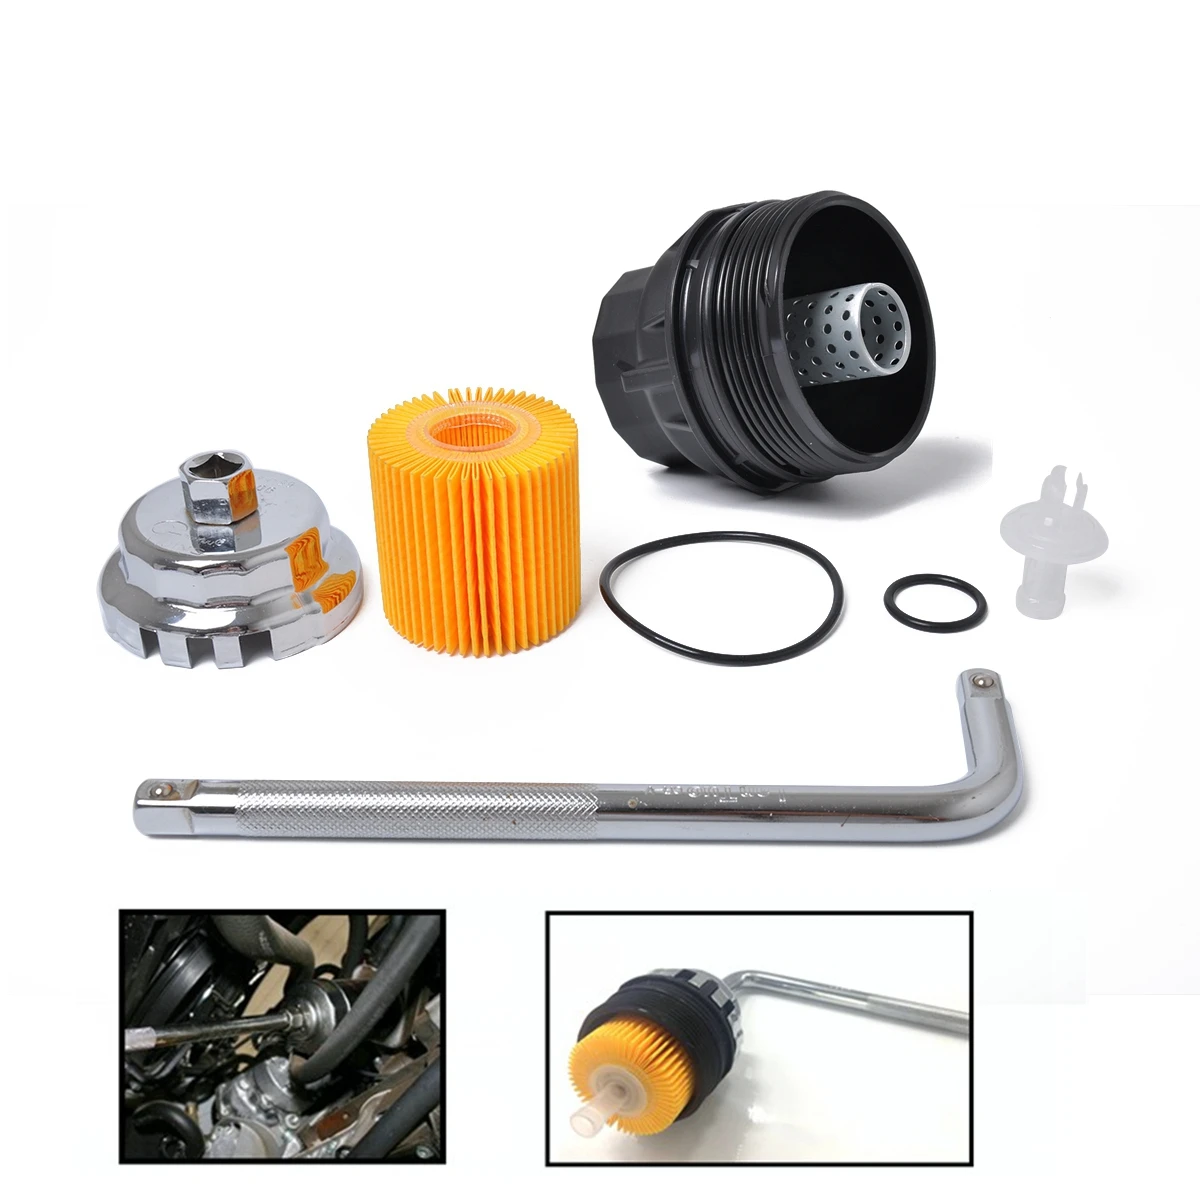 

New Oil Filter & Oil Filter Cap For Lexus Venza Tacoma 15620-36020 with 64.5mm Oil Filter Wrench Car accessories